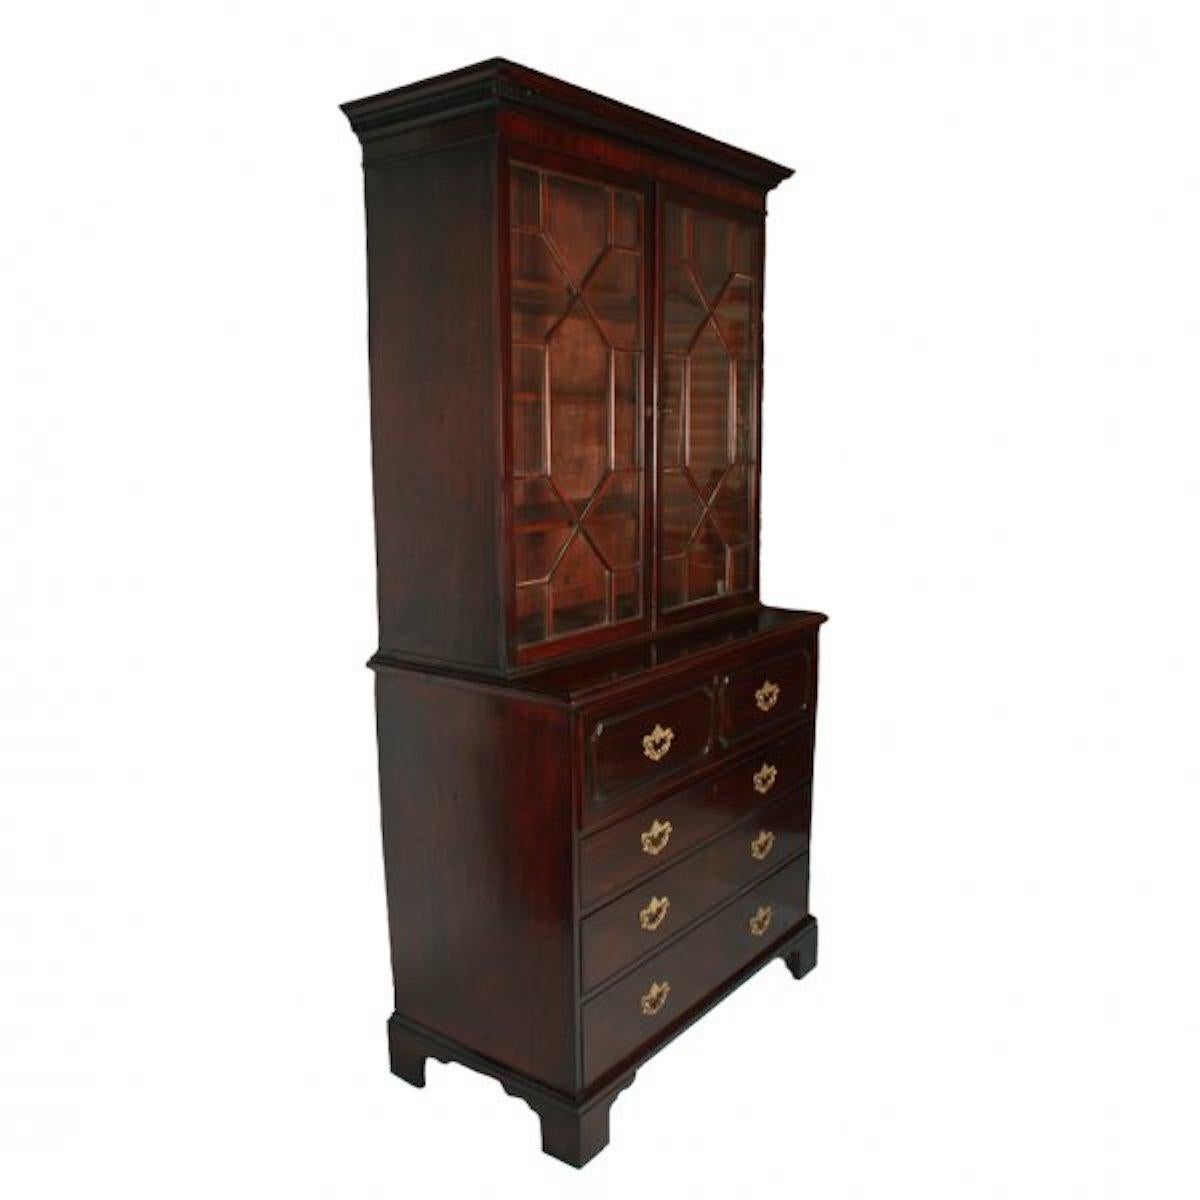 A late 18th century George III mahogany secretaire chest with a bookcase top.

The secretaire chest has a fitted top drawer with a fall front writing surface, inside there are seven mahogany drawers with rosewood cross banding and four pigeon